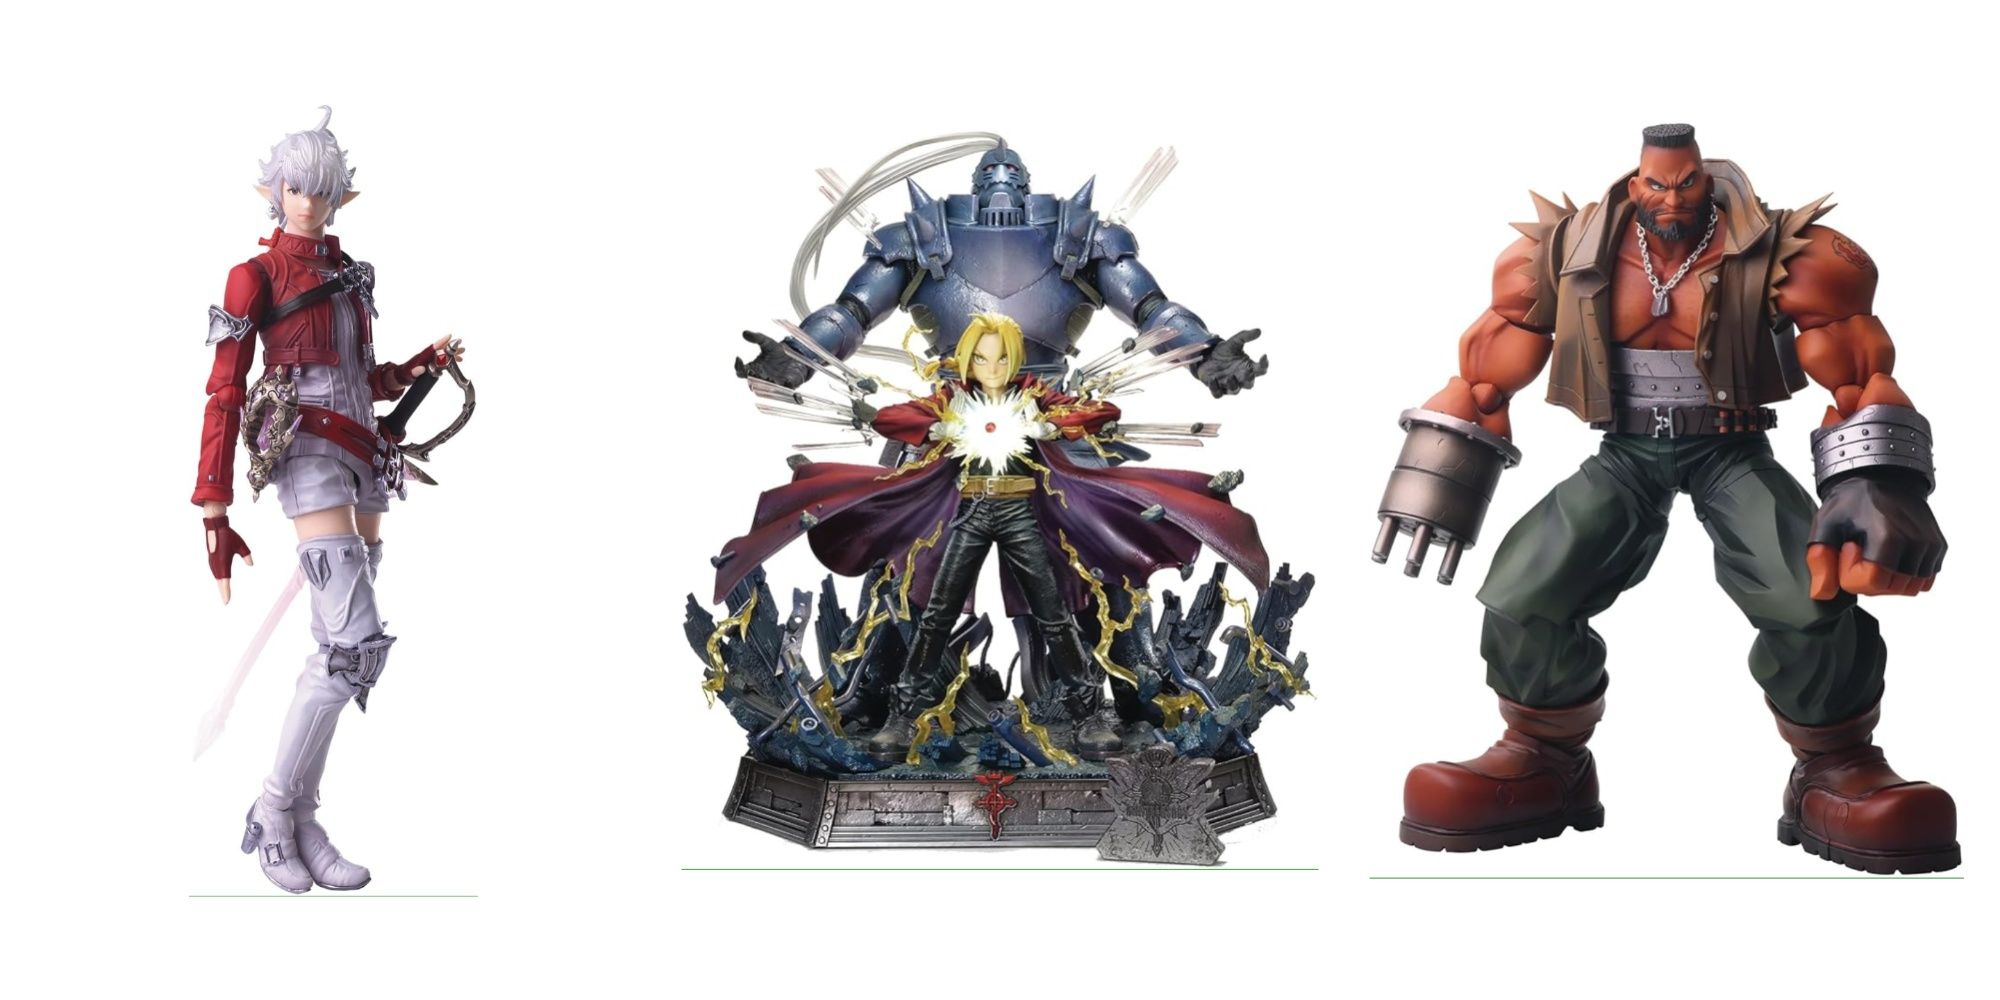 Alizaie from FF14, Ed and Al from Full Metal Alchemist and Barret from FF7 figures from Square Enix side by si